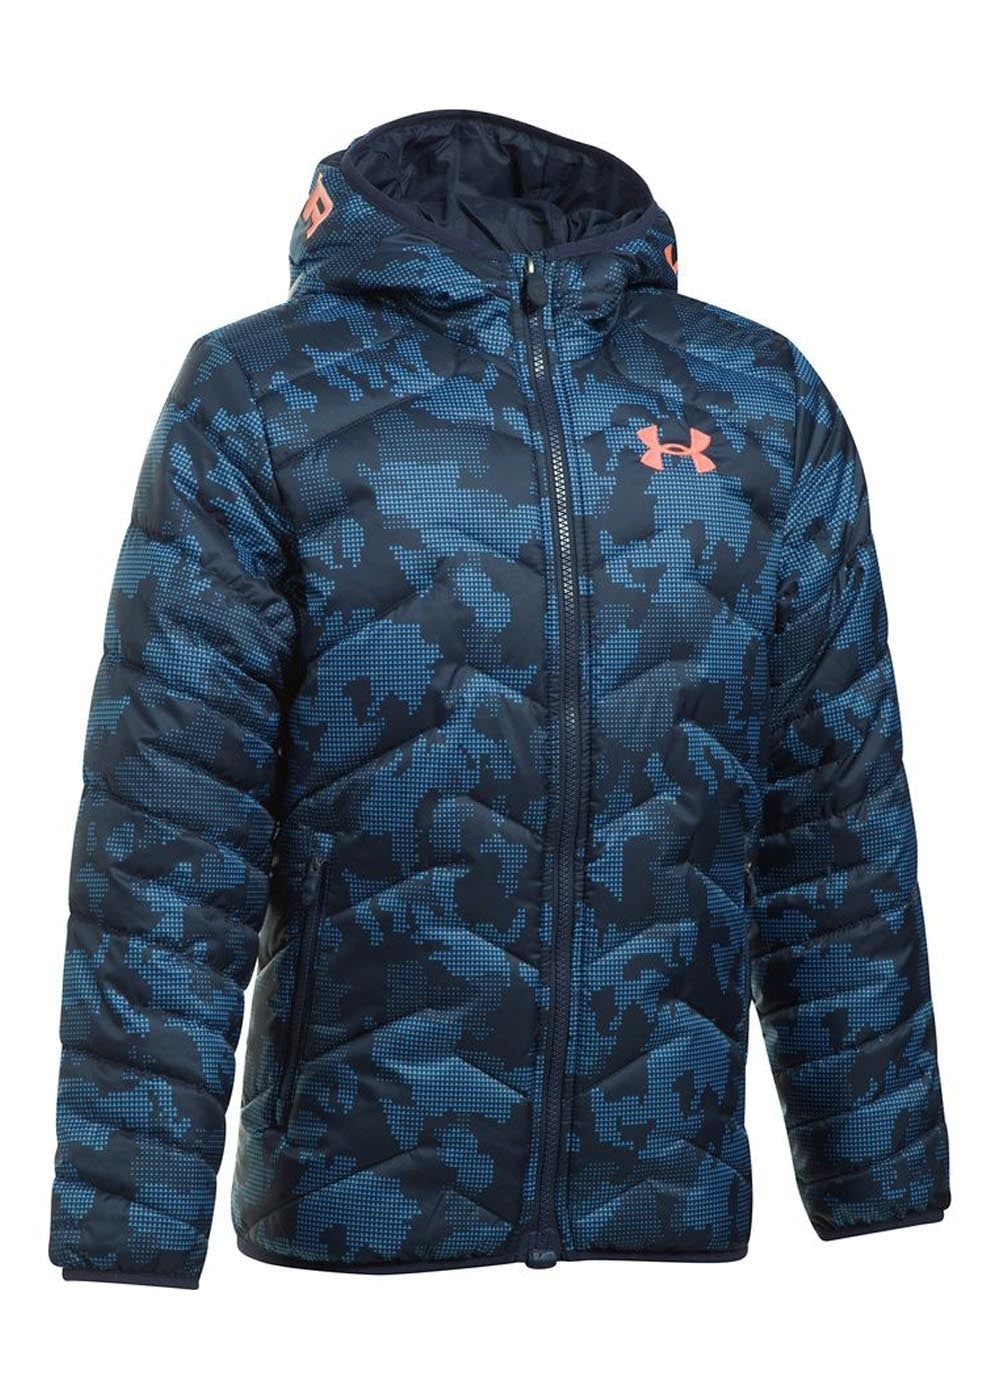 under armor youth coldgear